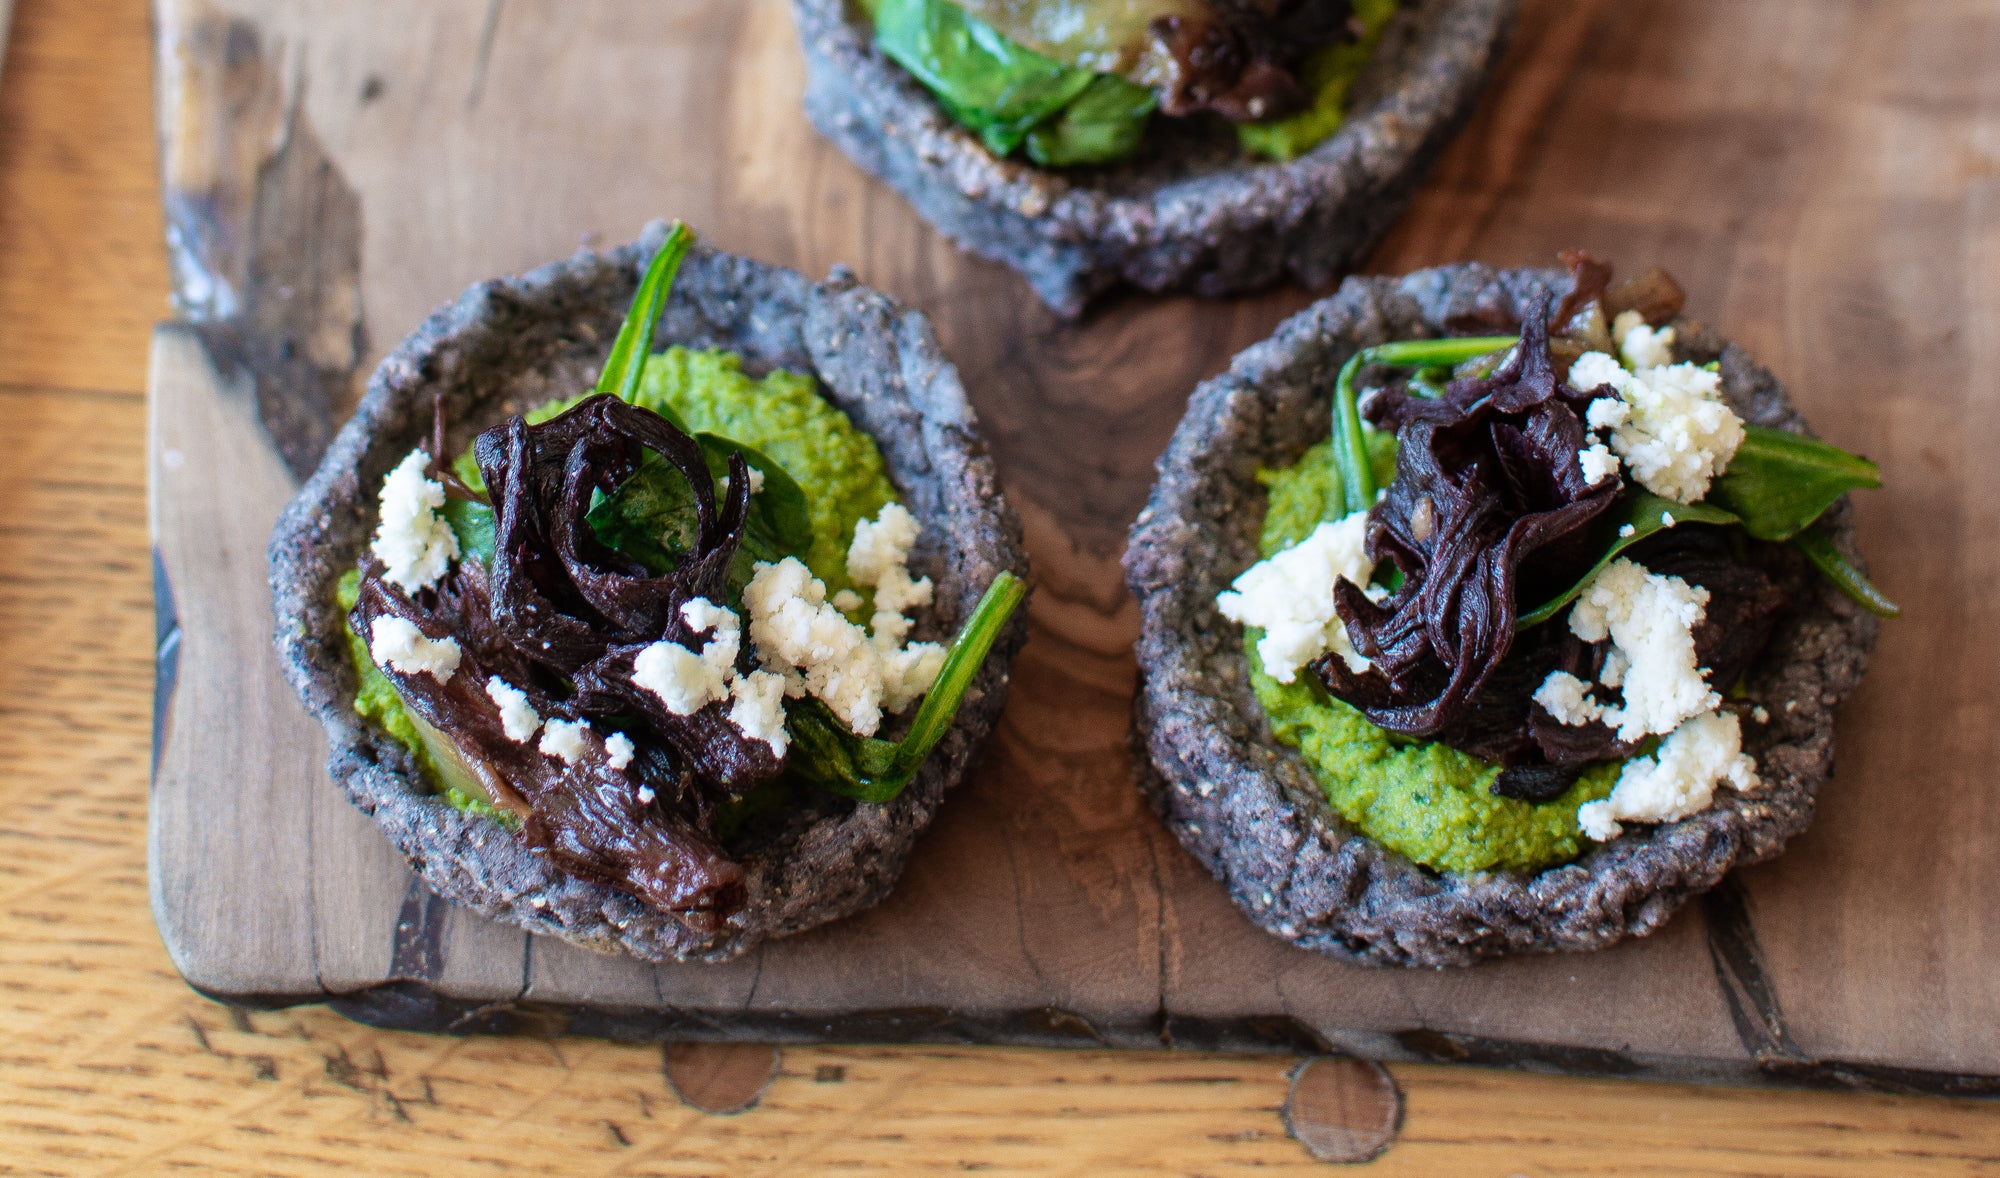 Spinach, Jamaica and Caramelized Onion Sopes